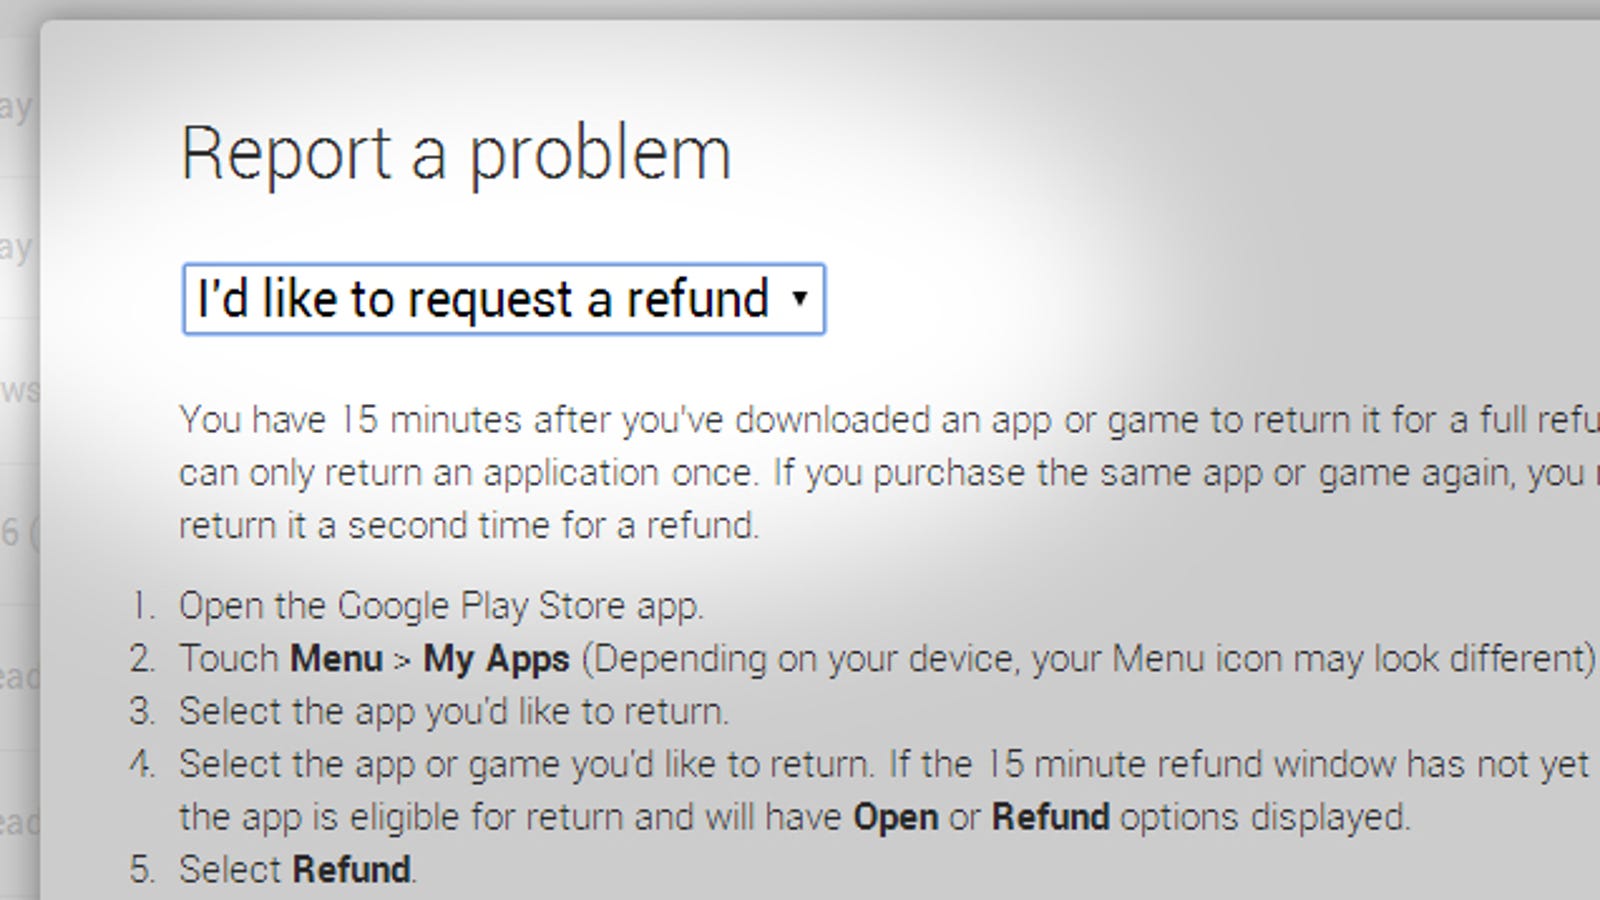 You Can Still Get A Refund From Google Play After The 15 Minute Window - 